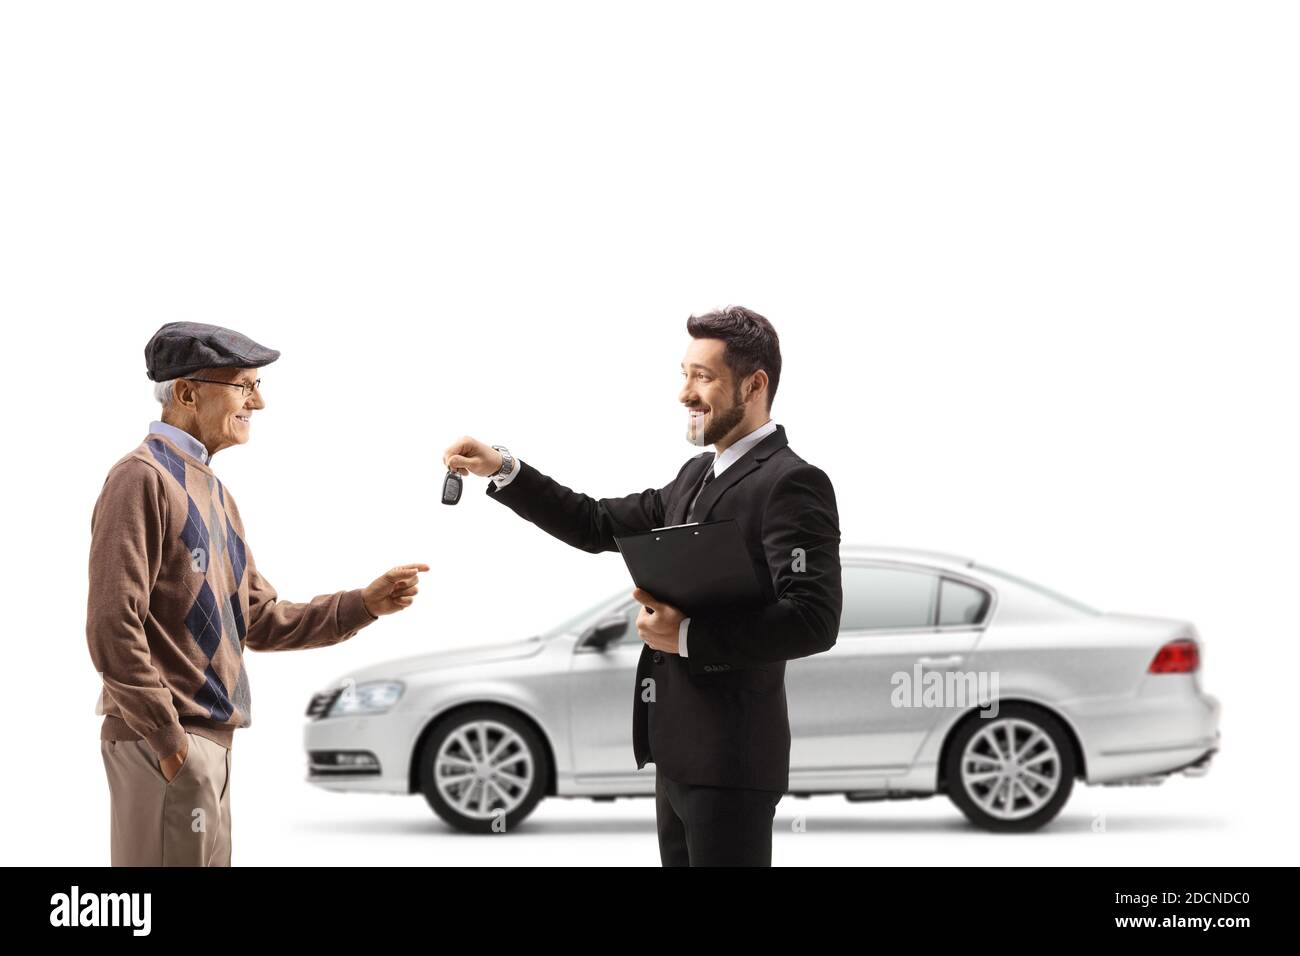 Salesman giving car keys to an elderly customer isolated on white background Stock Photo